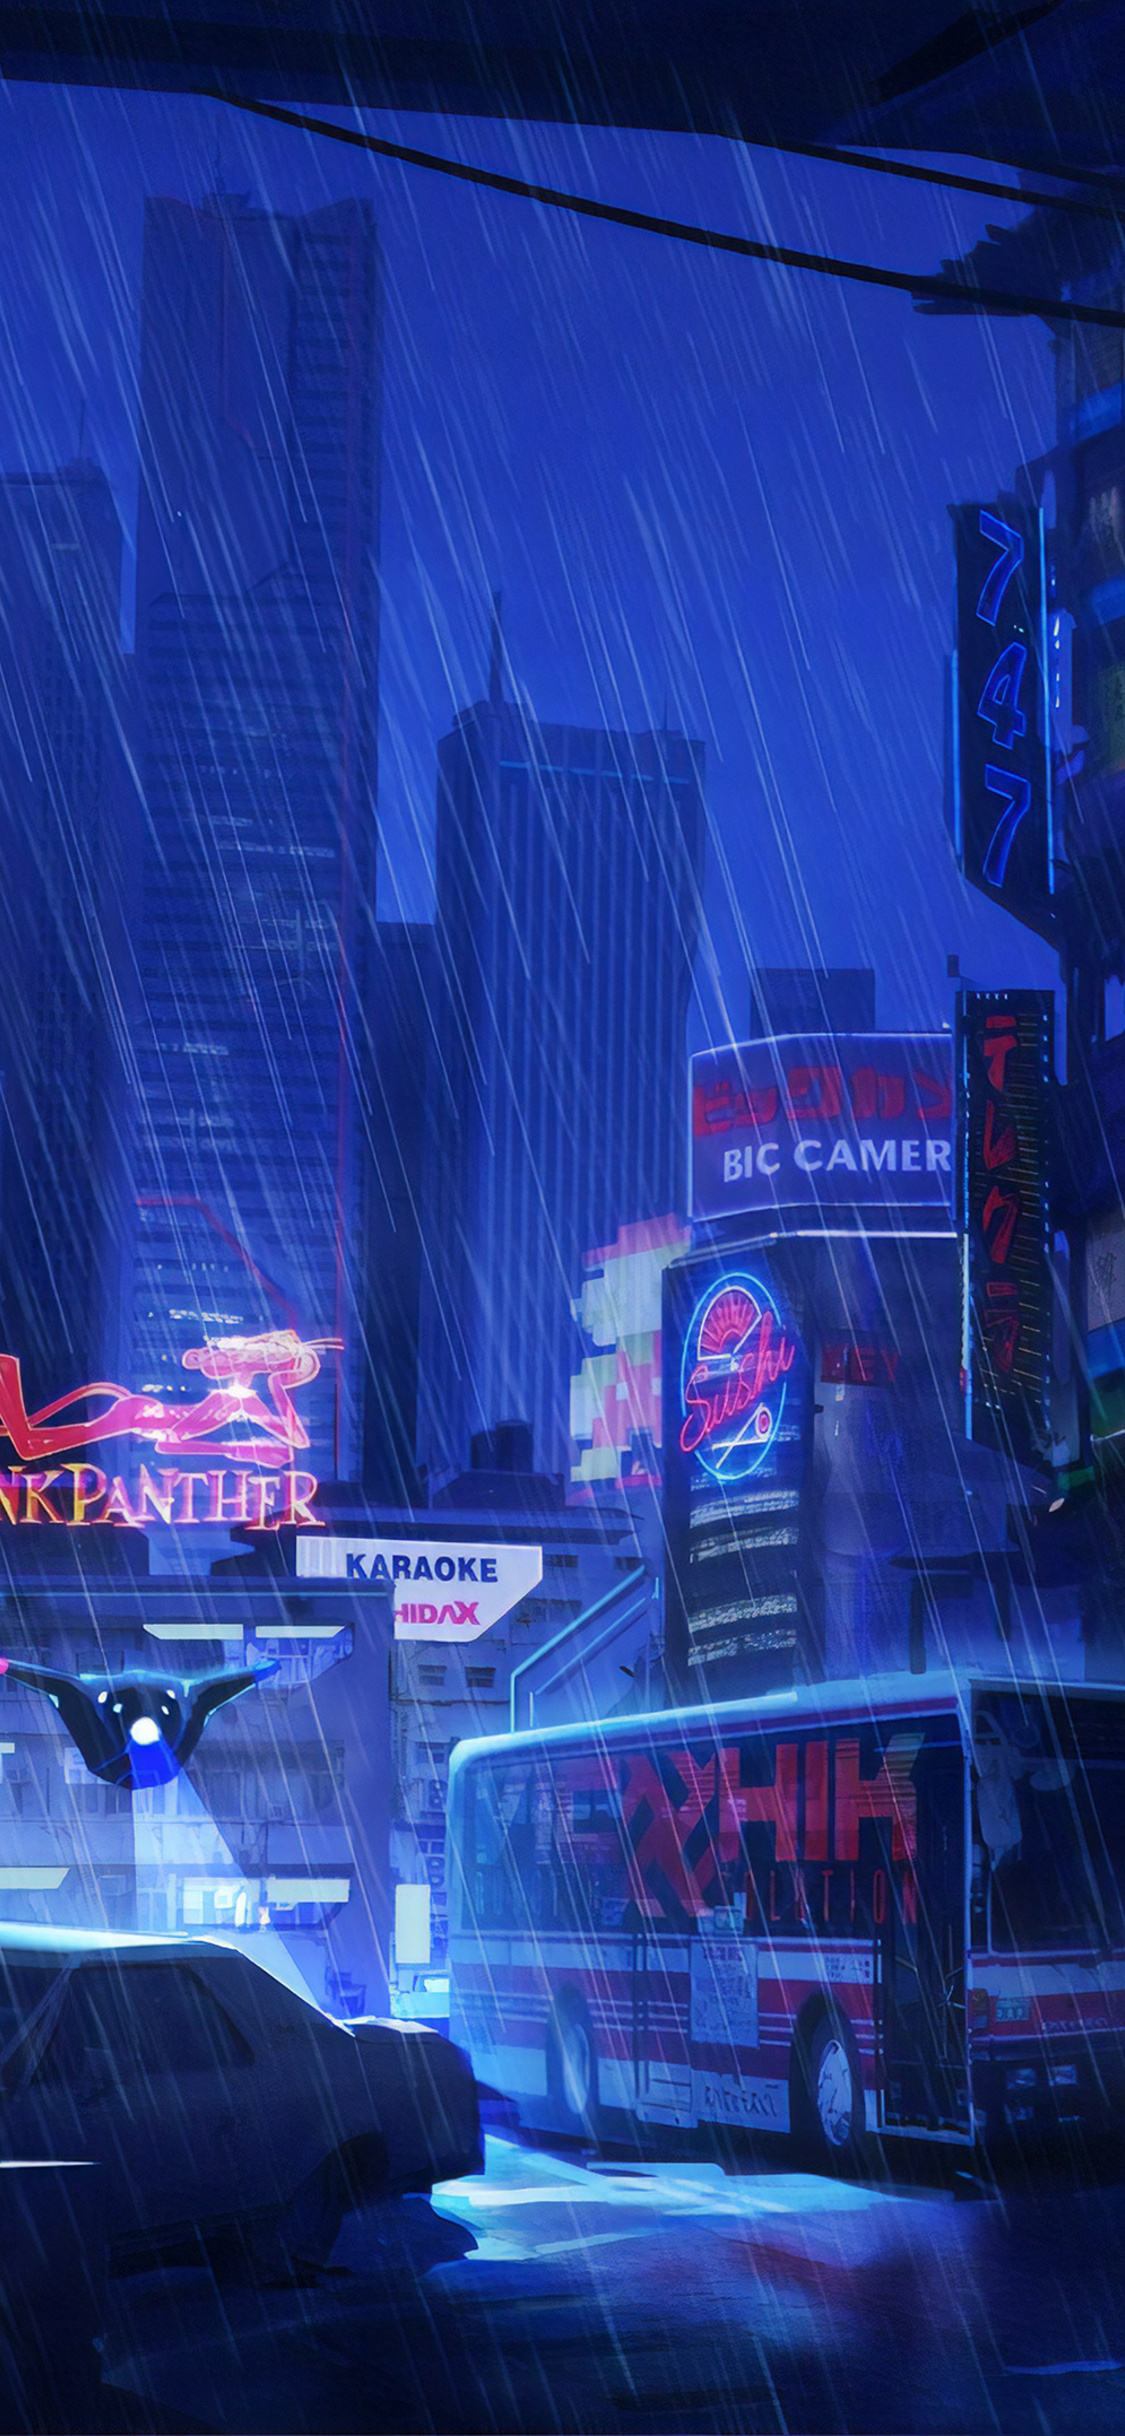 A city street with rain and neon lights - City